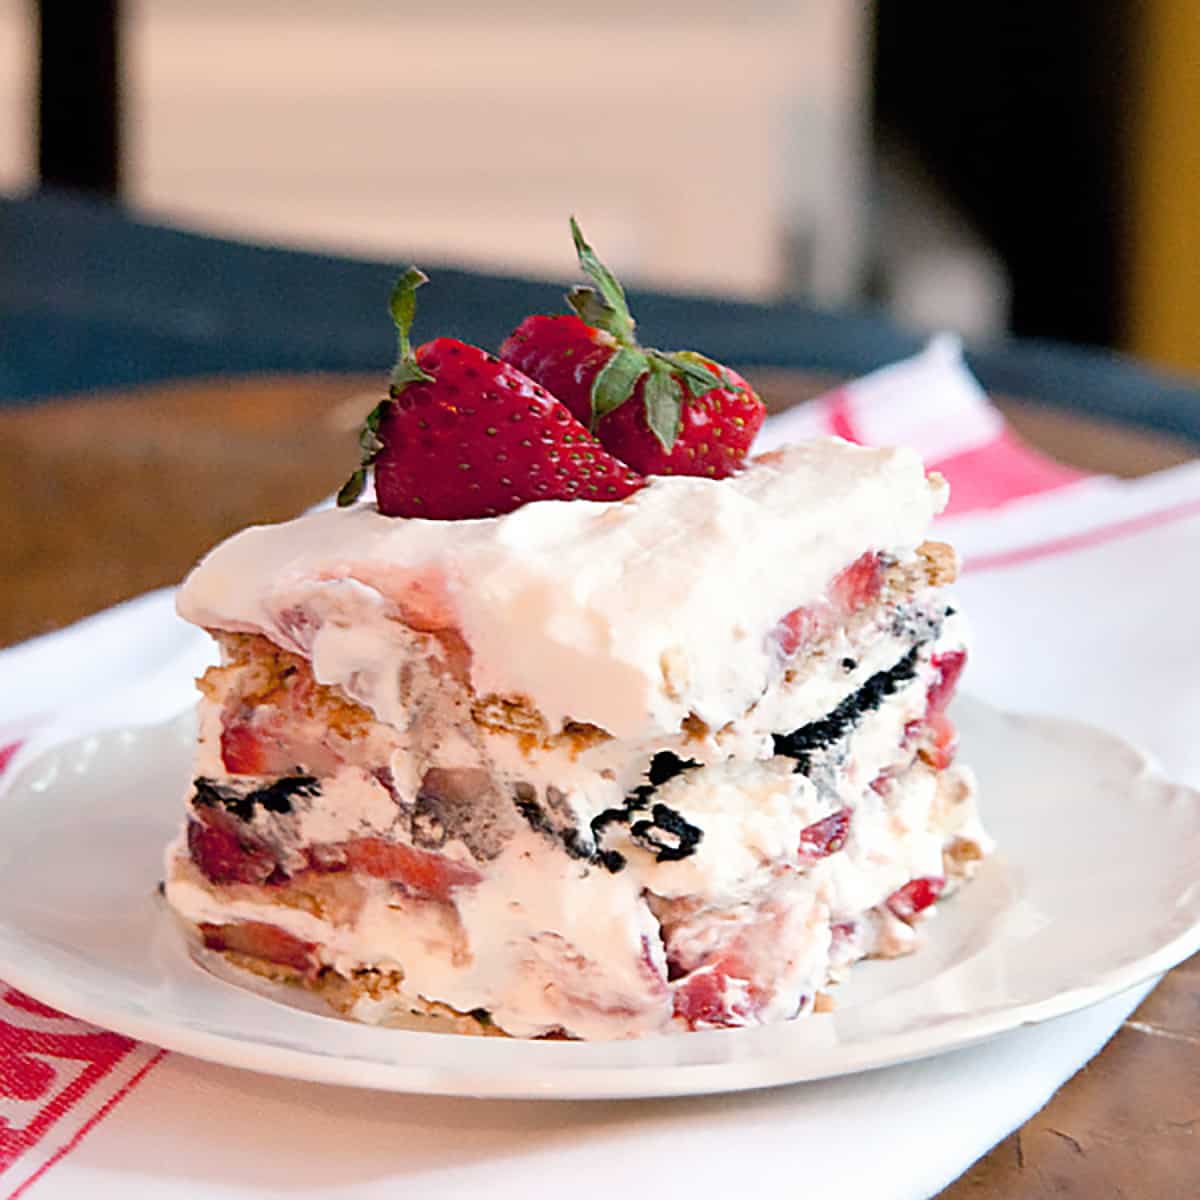 A serving of strawberry icebox cake on a white plate.